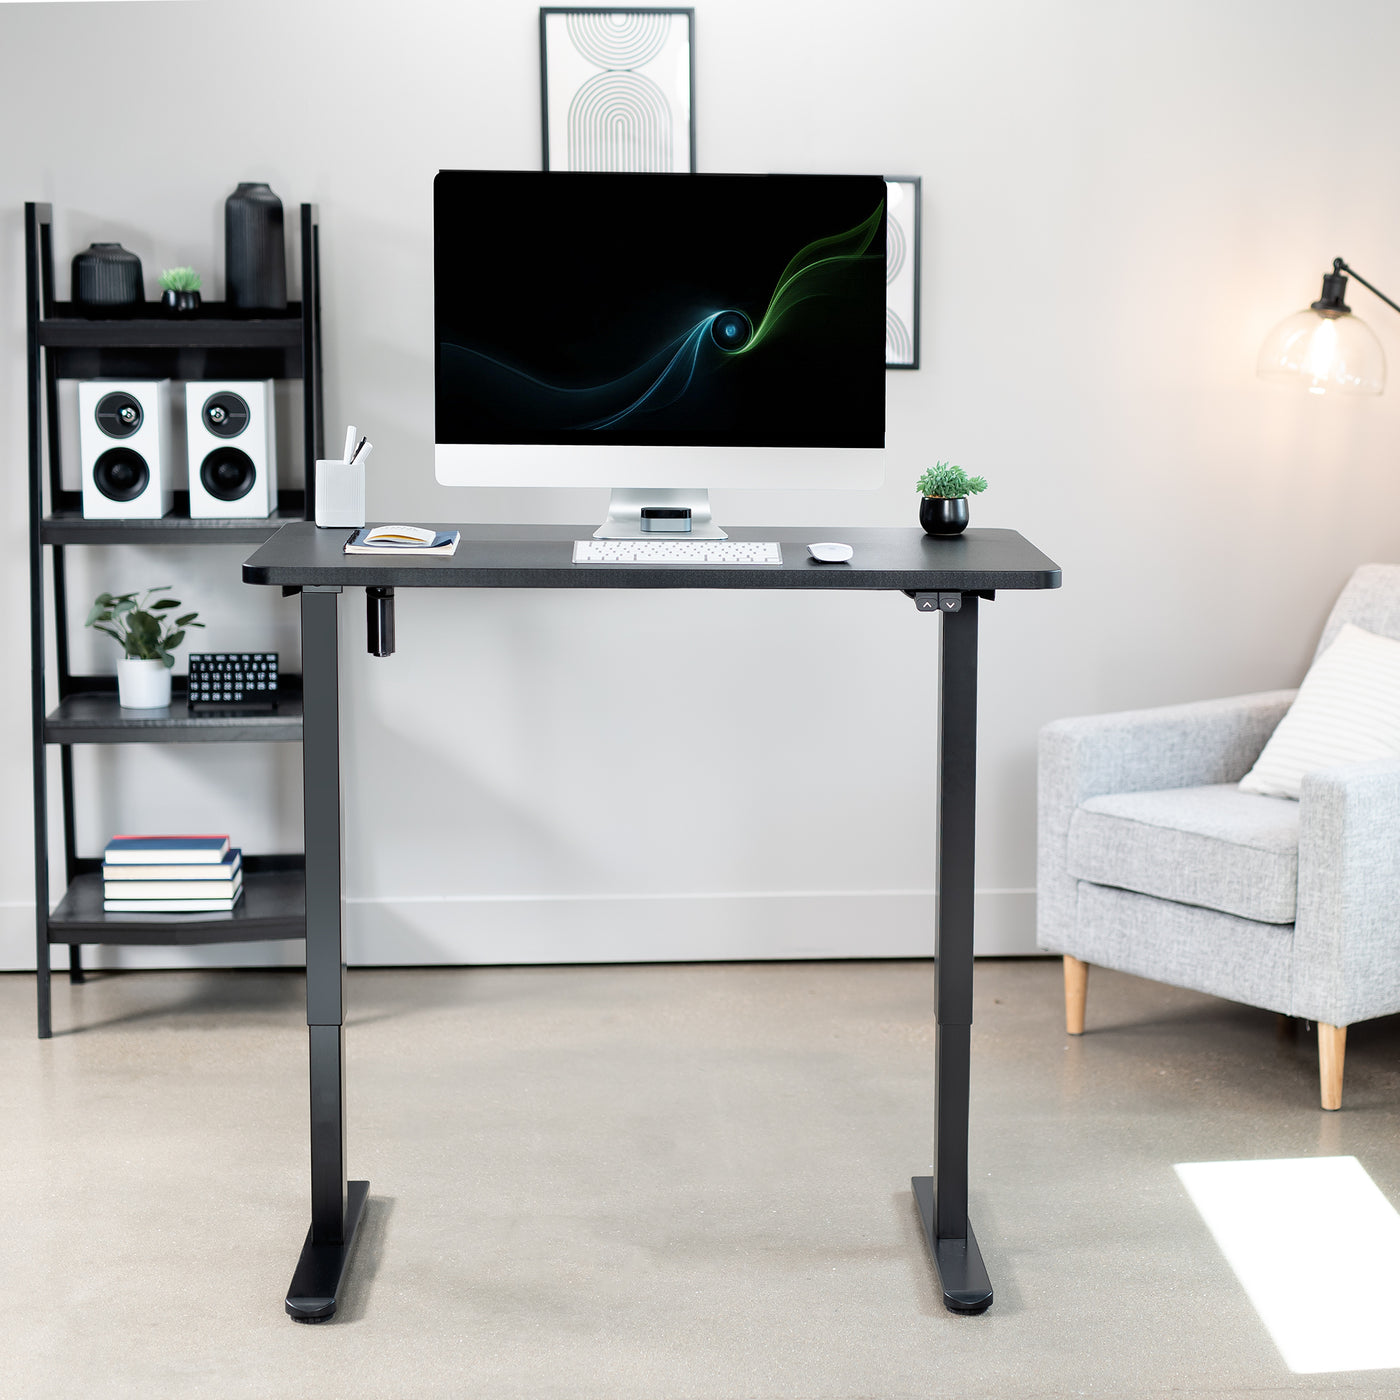 Fully furnished office space with modern sit-to-stand electric desk.